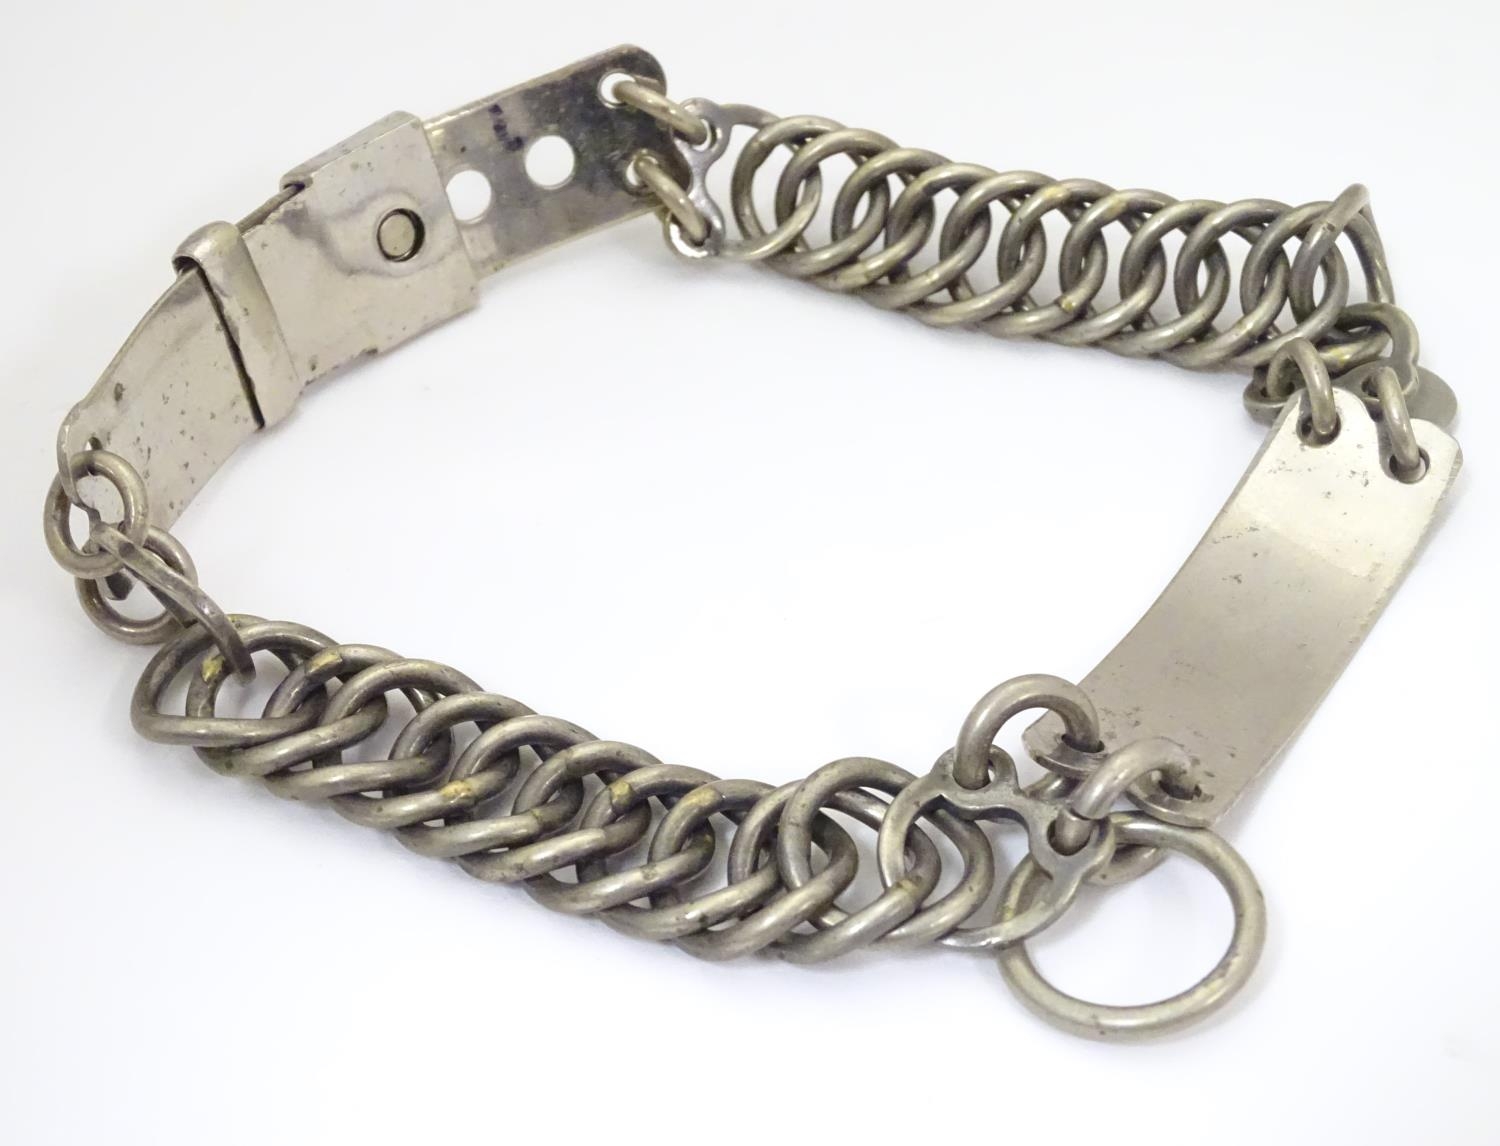 A French silver plate dog collar with chain links, adjustable clasp and engraved owner plaque. - Image 6 of 7